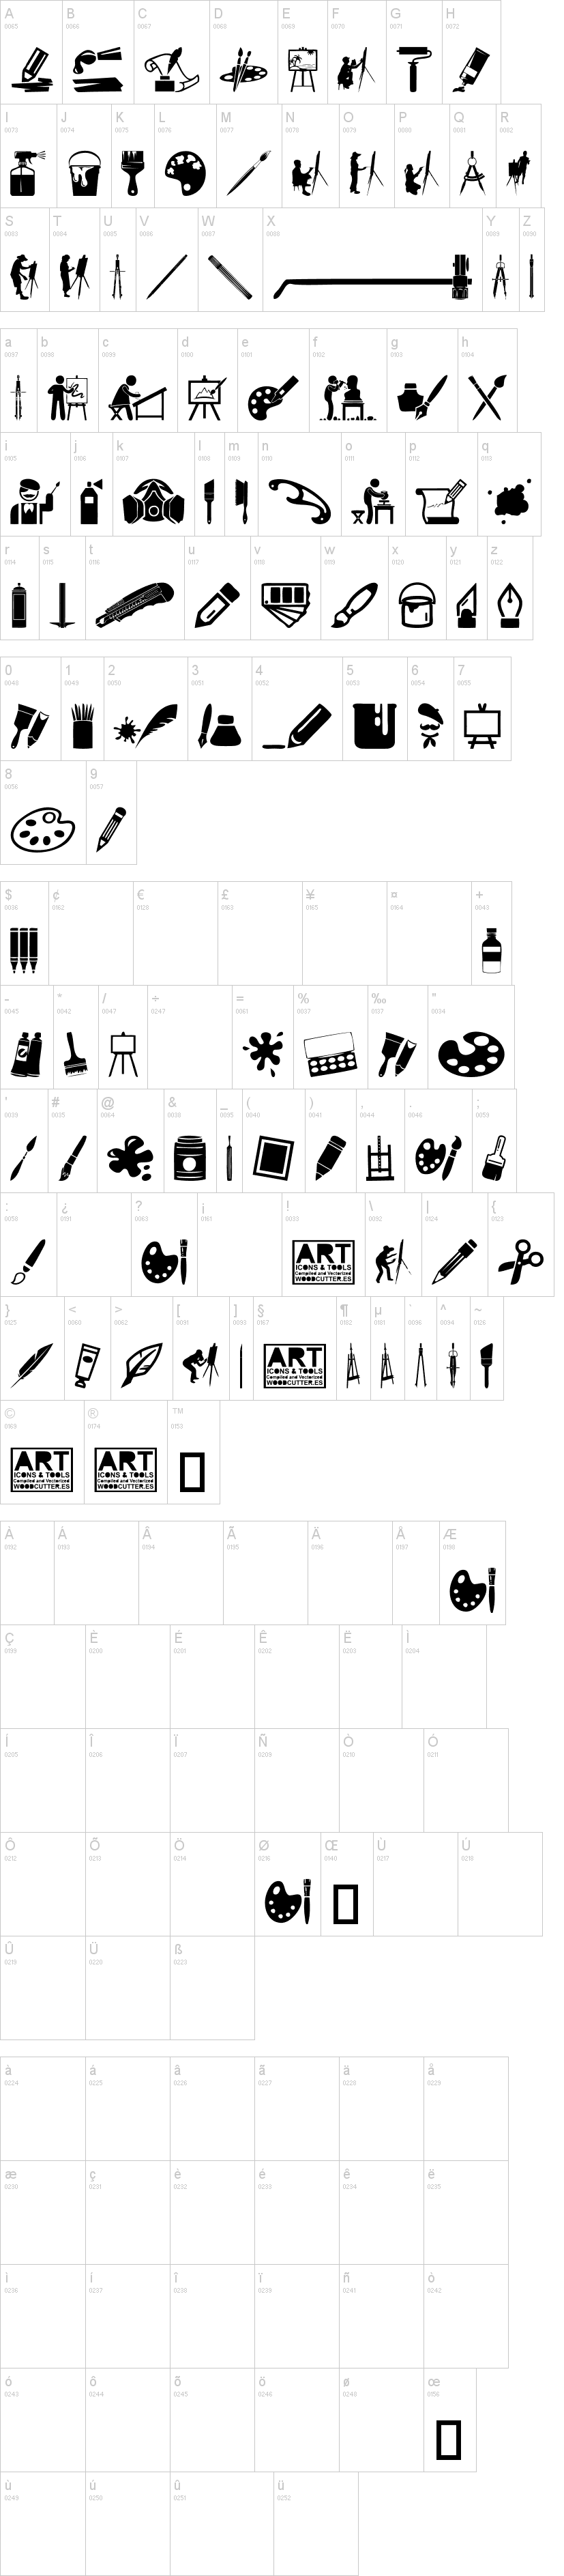 Art Icons and Tools